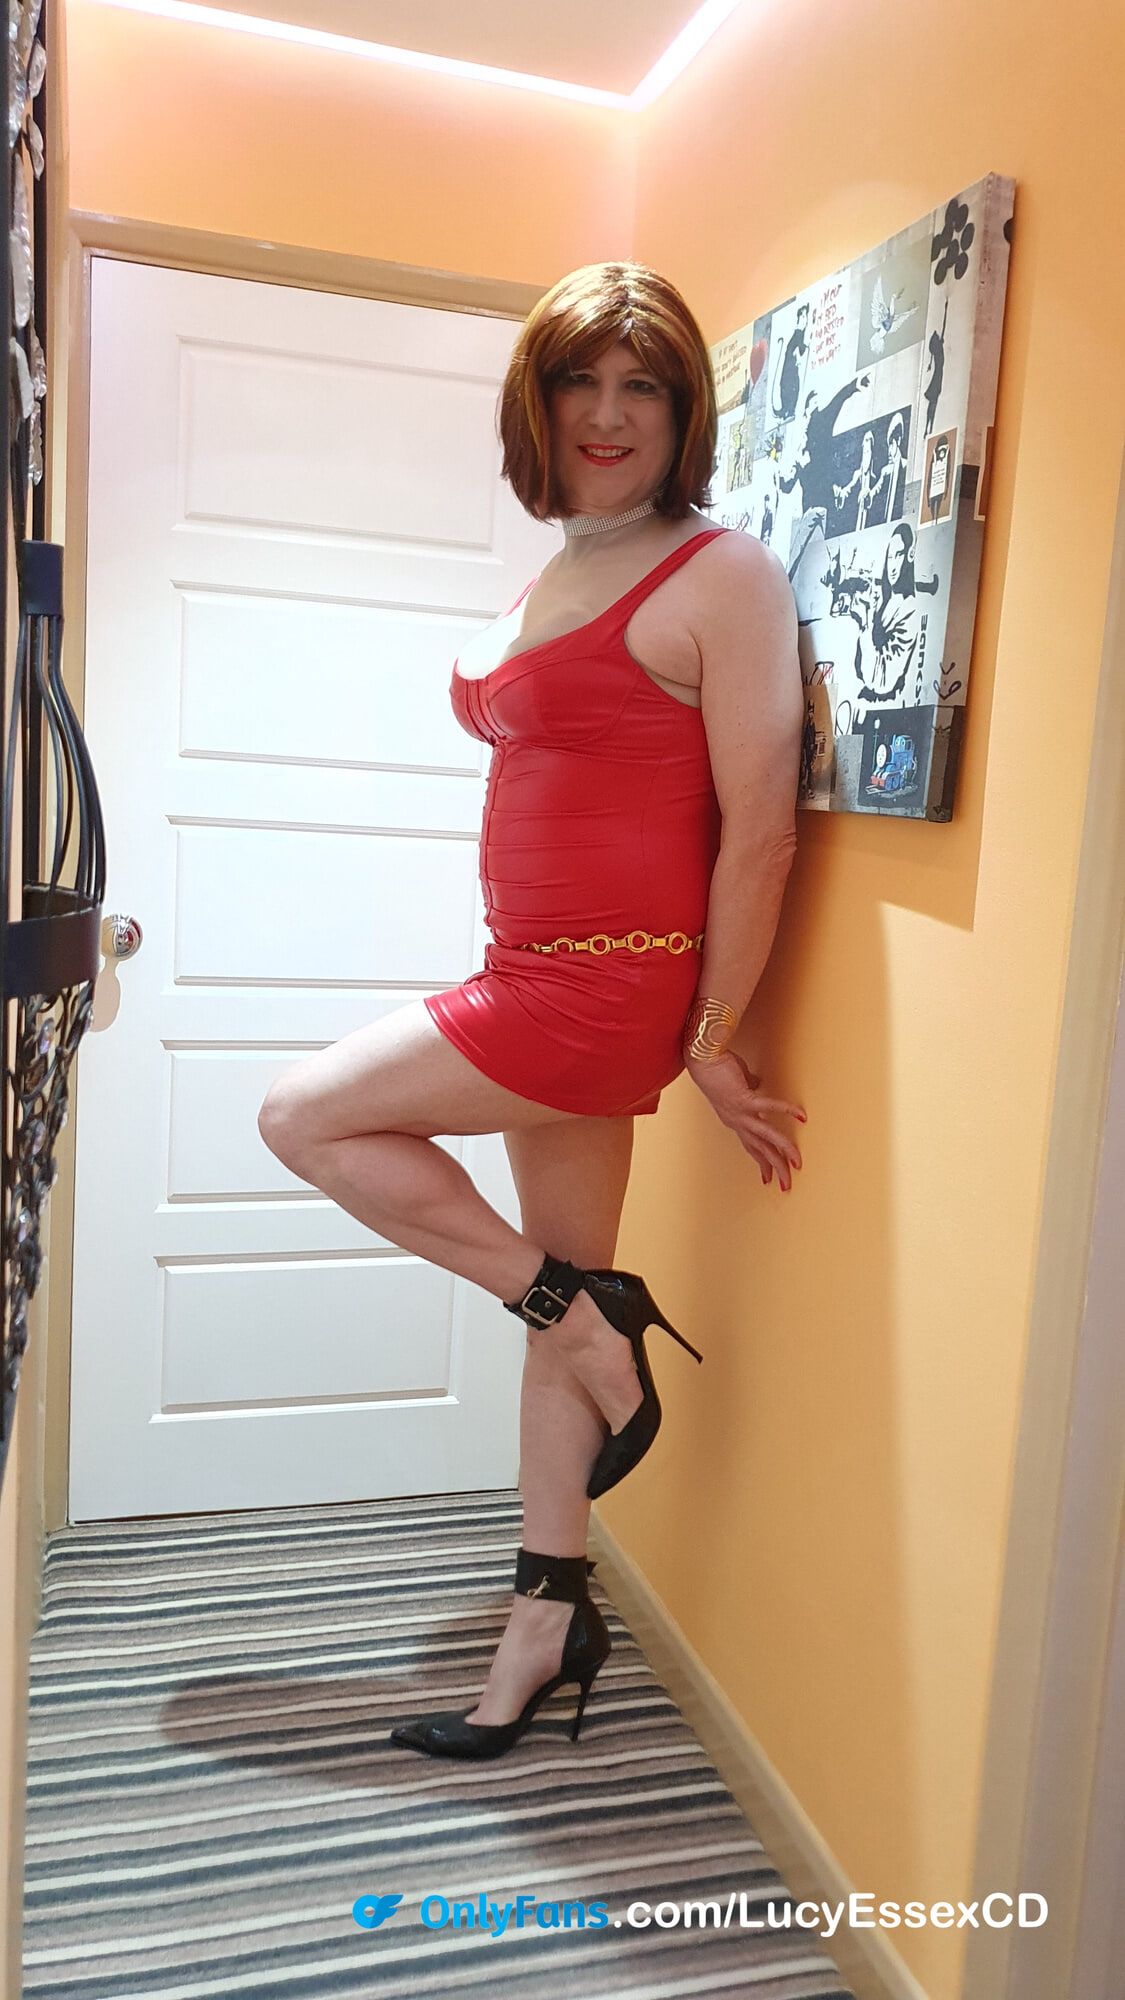 Sexy Sissy Lucy Essex CD showing off in red wet look dress #10